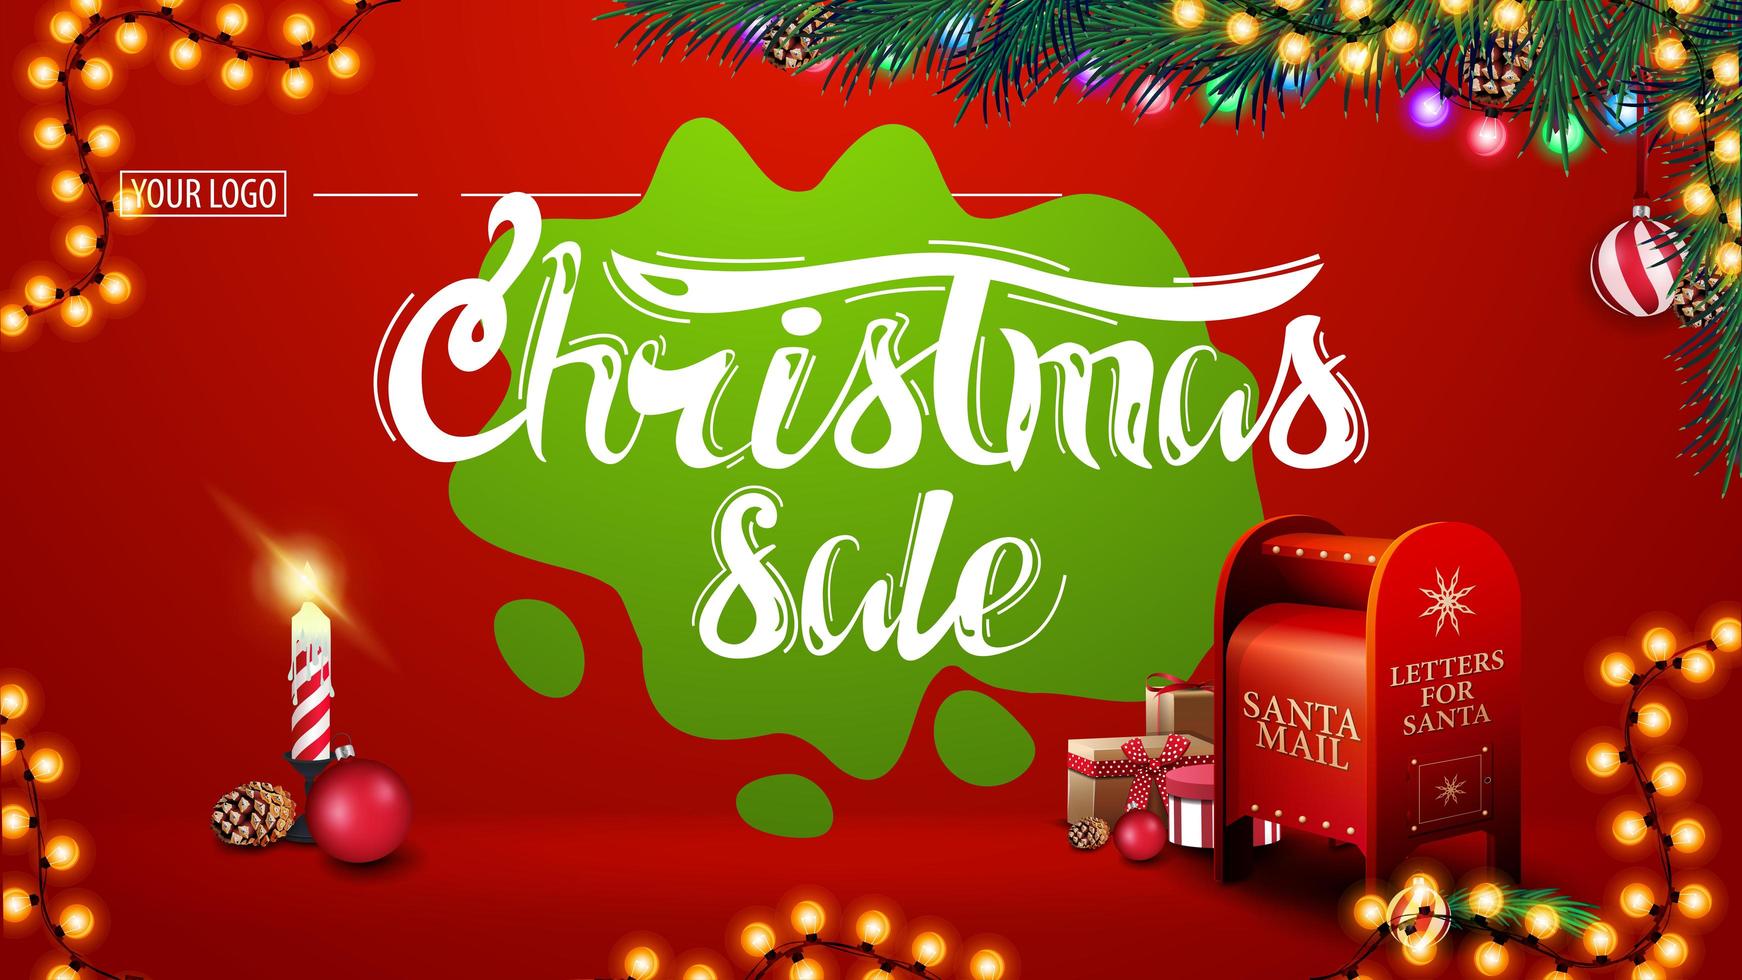 Christmas sale, modern red discount banner with beautiful lettering, garlands, green blot, Christmas tree branches, candle and Santa letterbox with presents vector